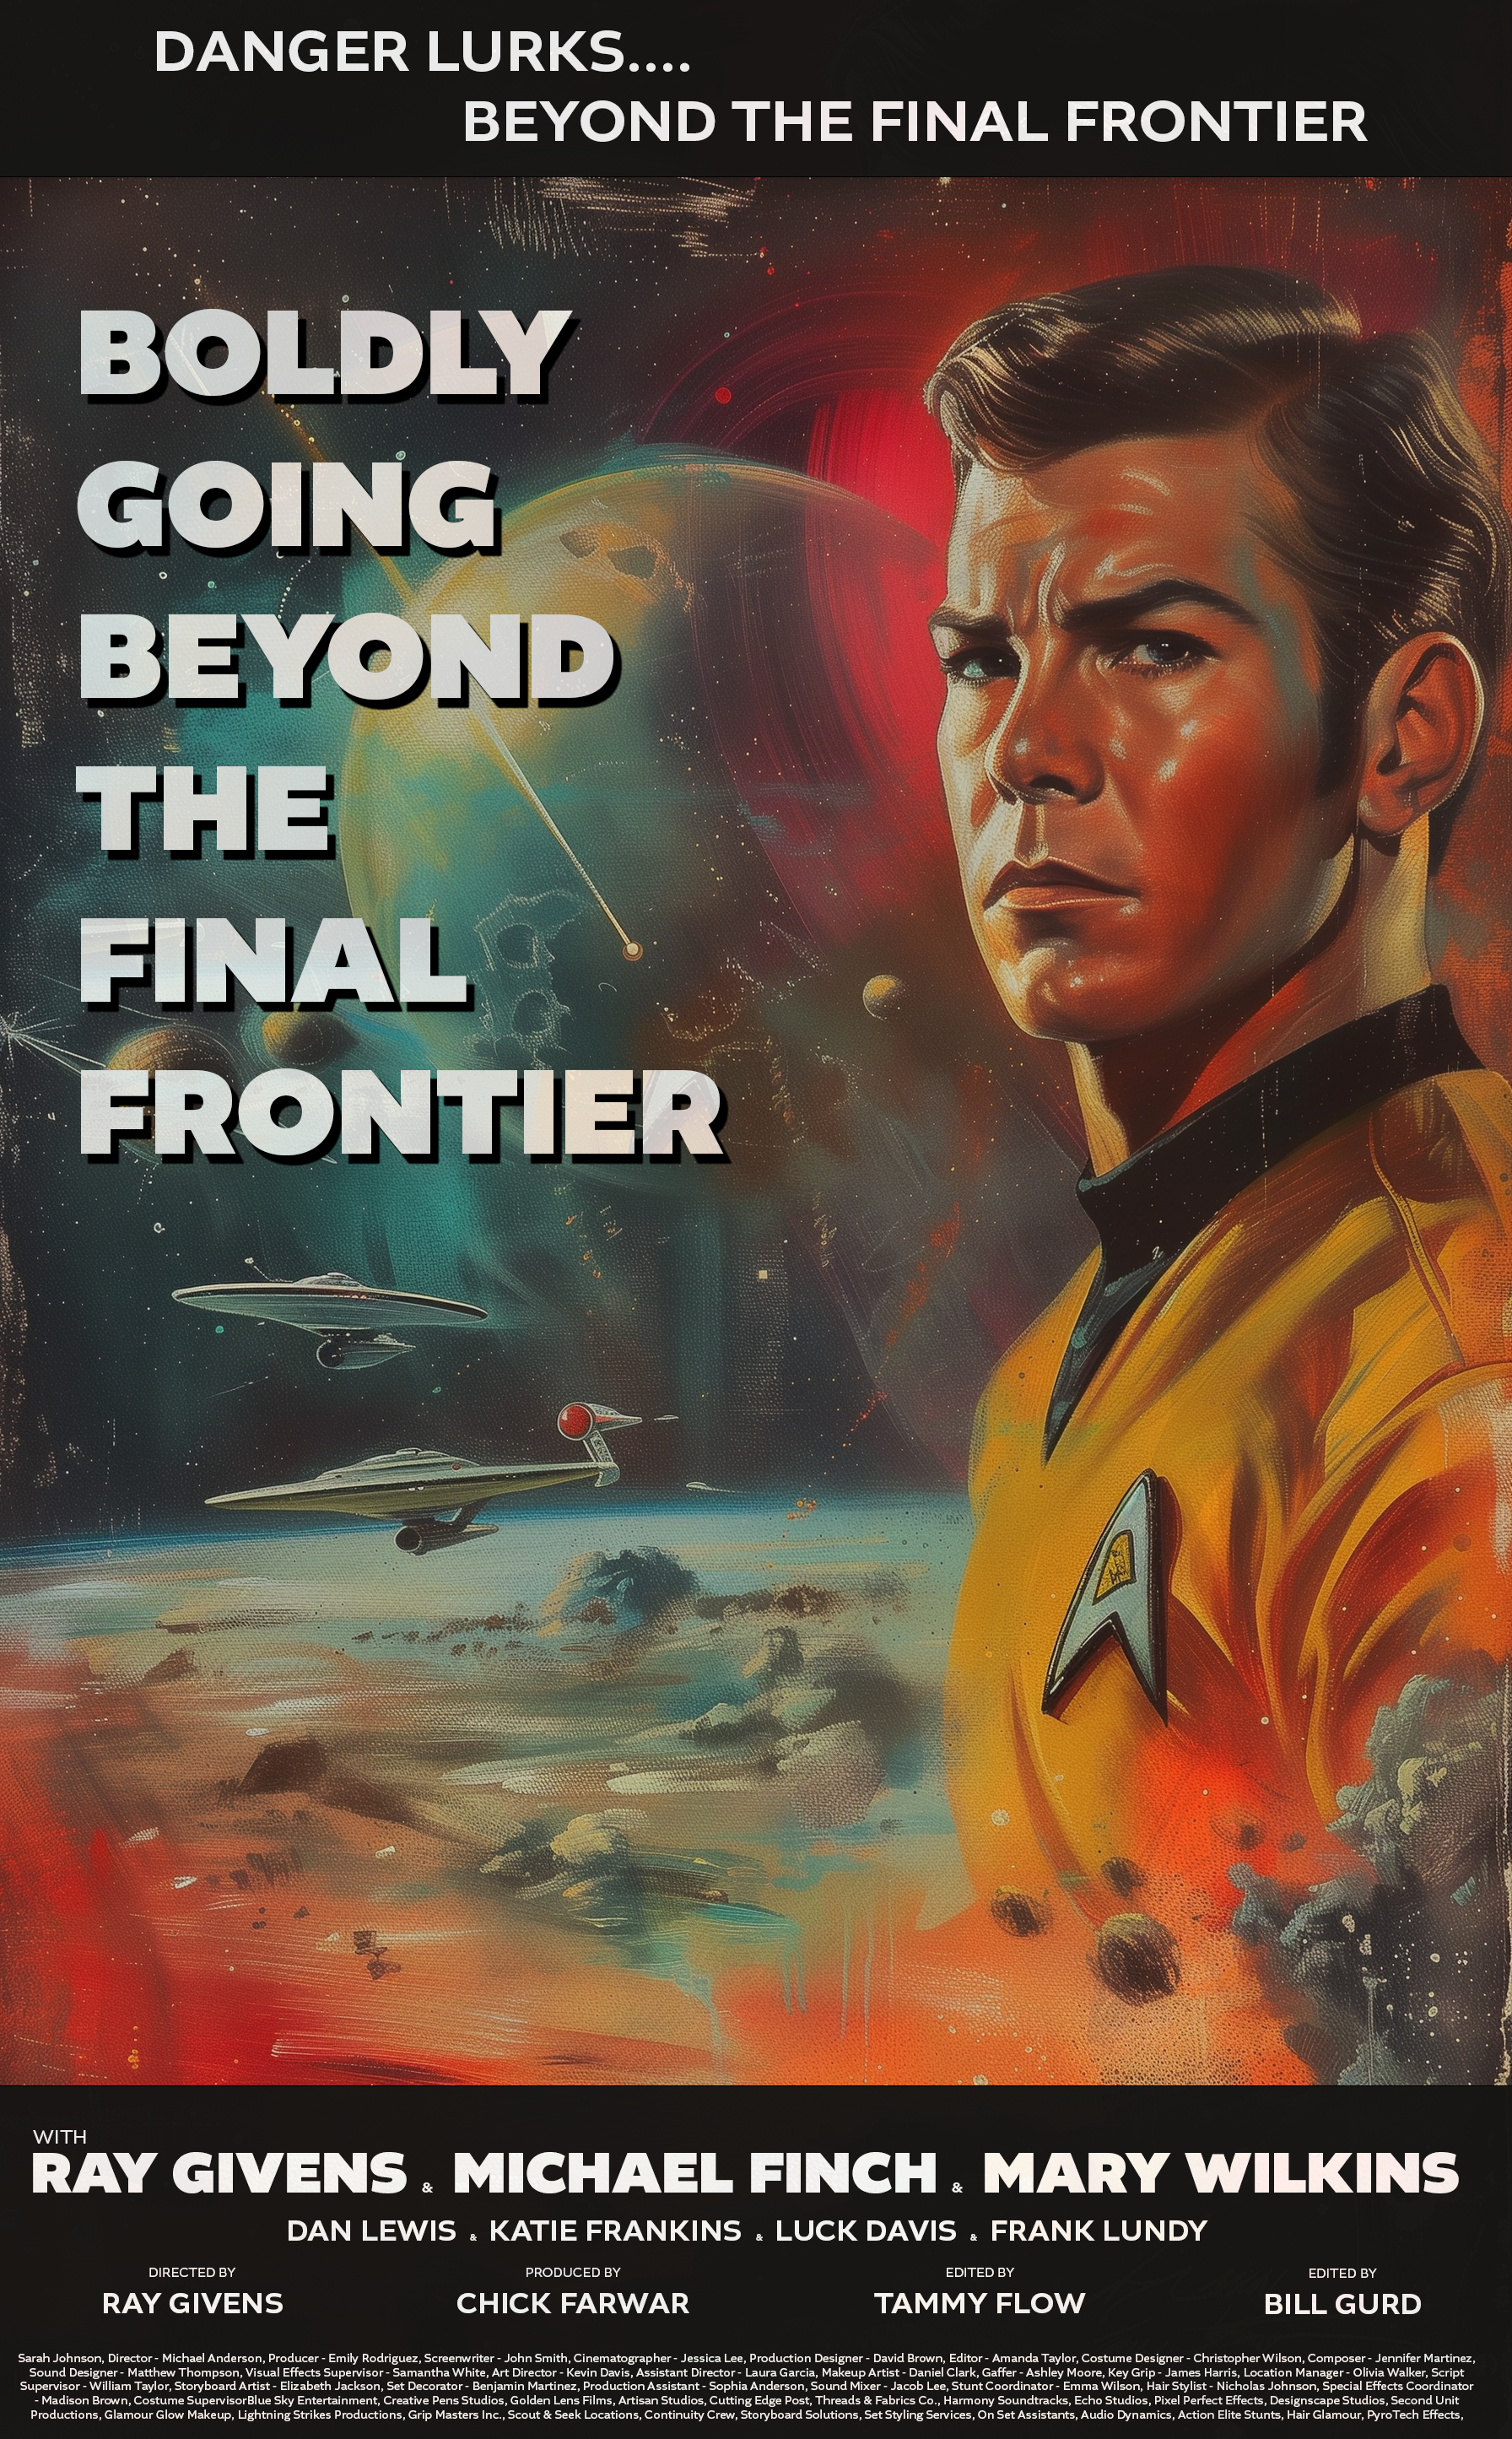 Name:  Beyond the Final Frontier.png
Views: 112
Size:  8.19 MB